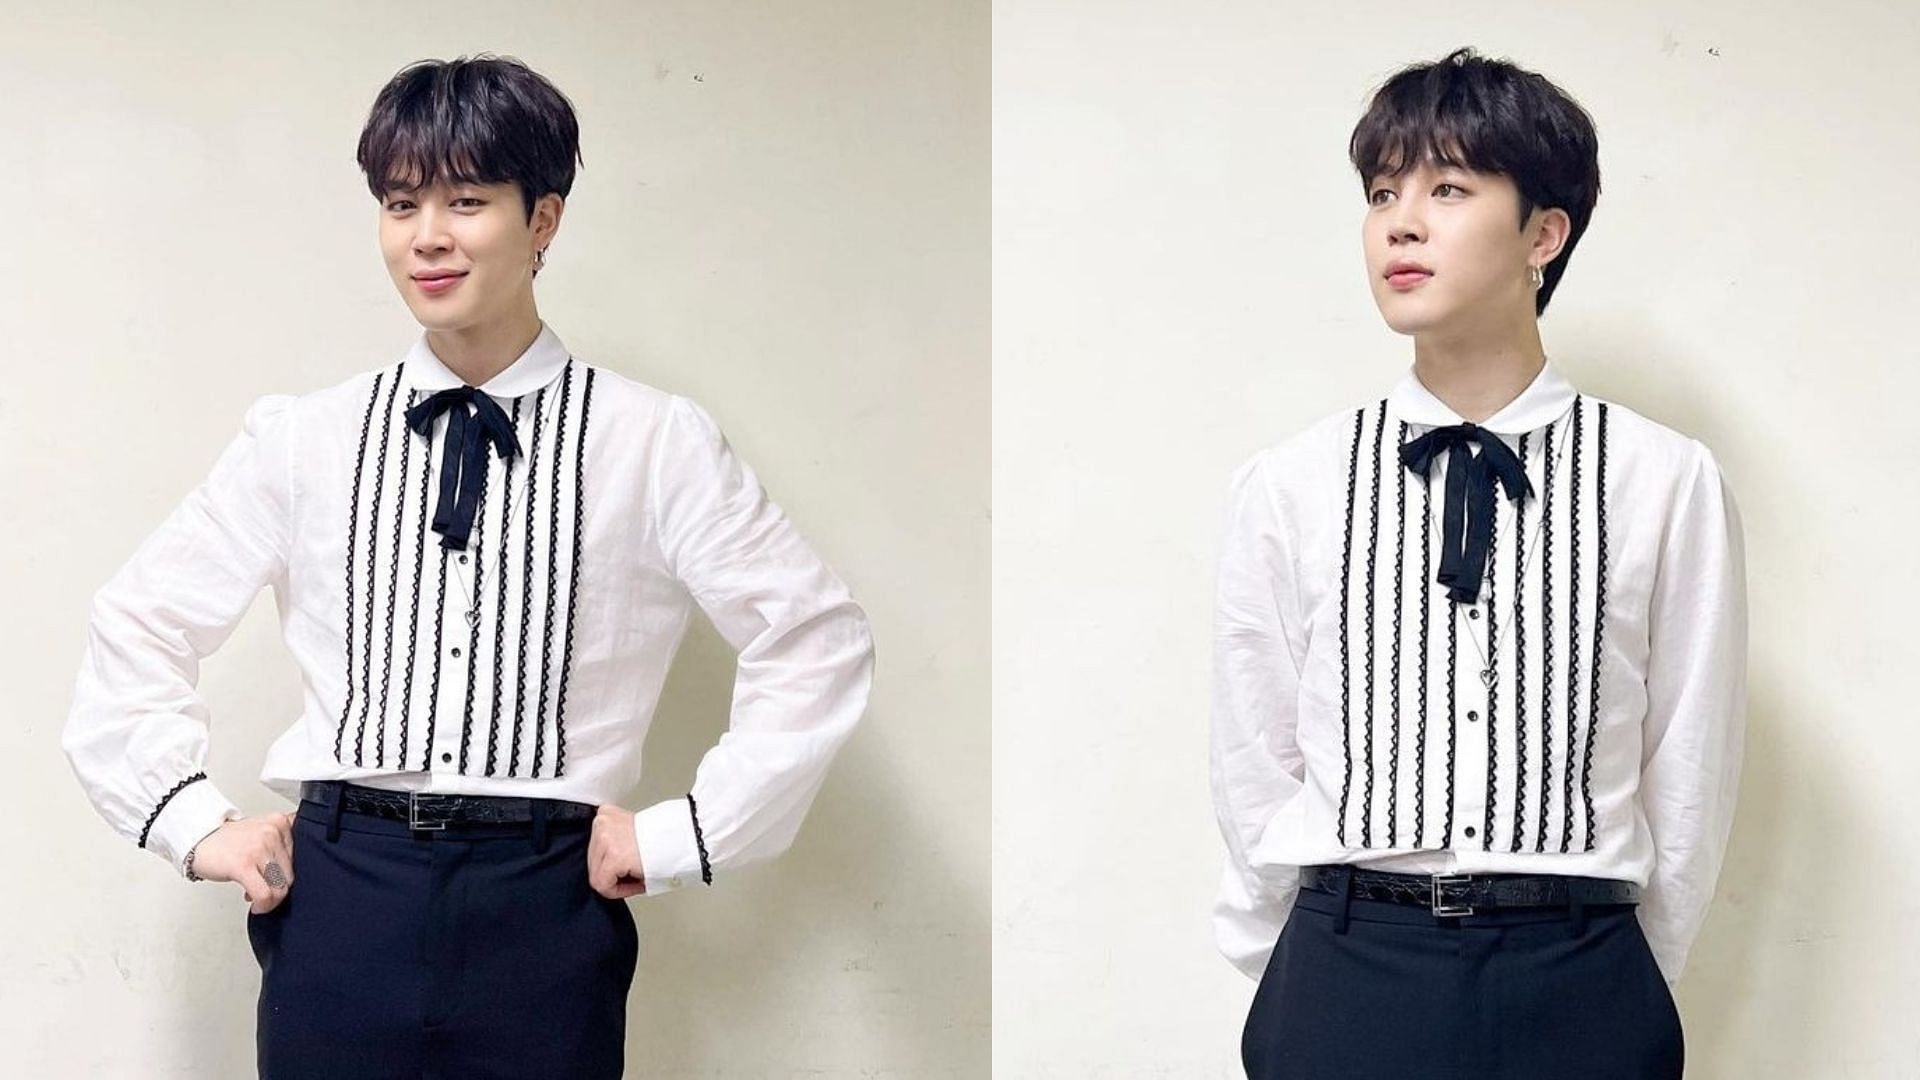 BTS&#039; Jimin often makes fans laugh with the things he says (Image via @j.m/Instagram)